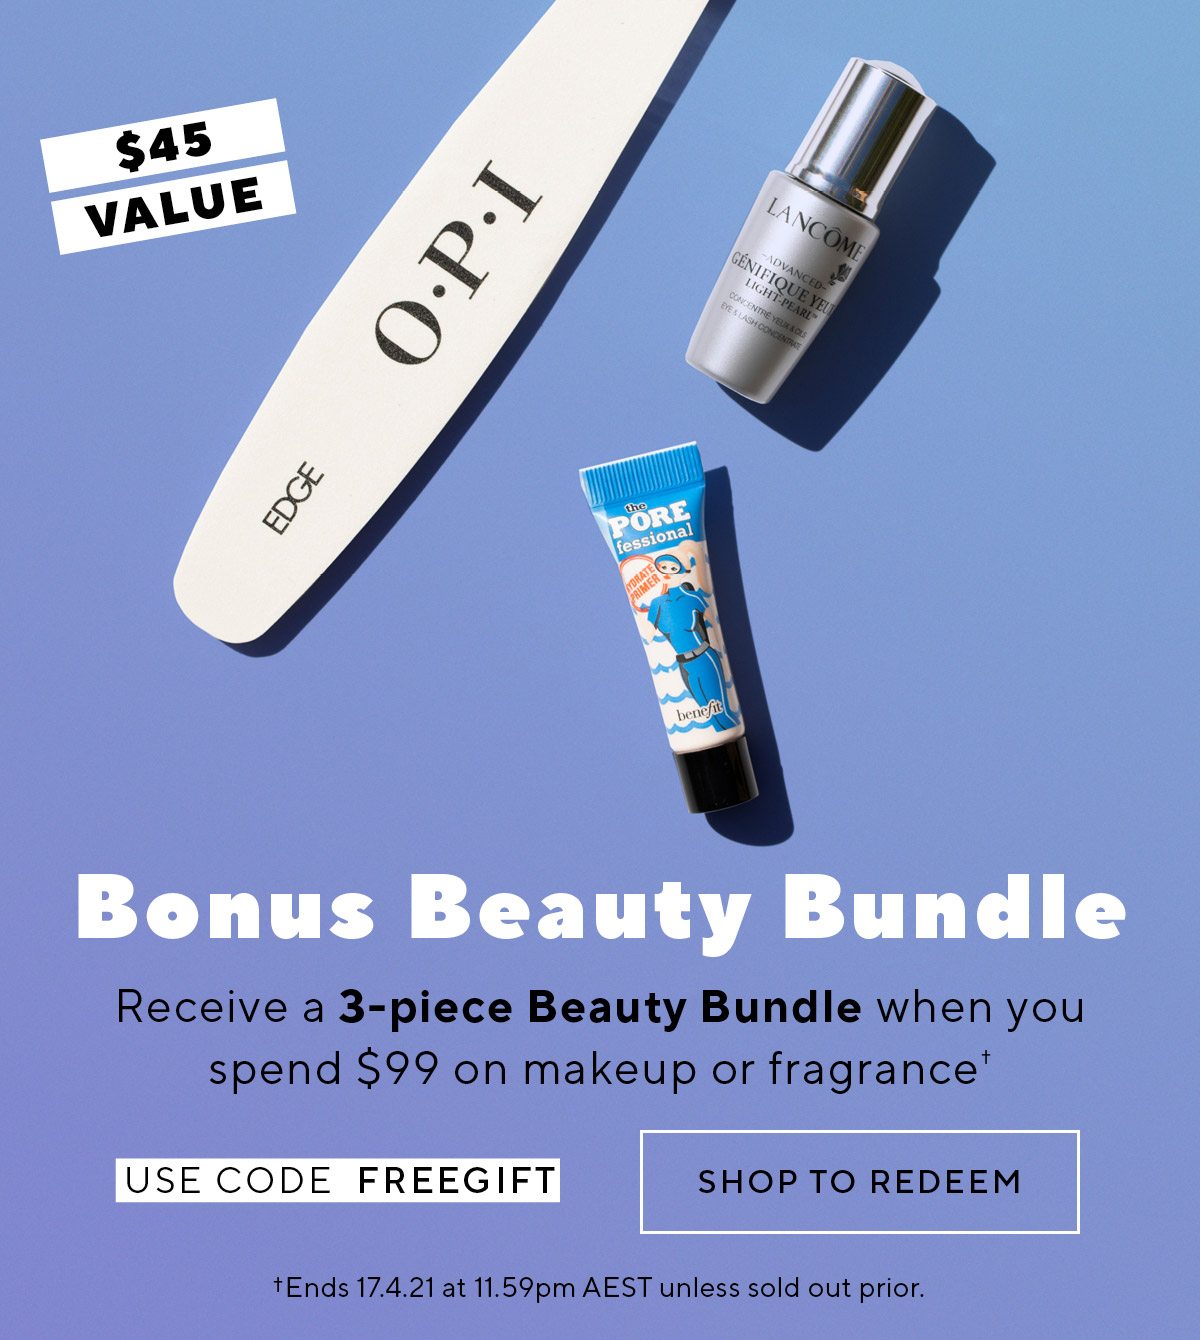 Receive a 3-piece Bonus Beauty Bundle when you spend $99 or more on makeup or fragrance†